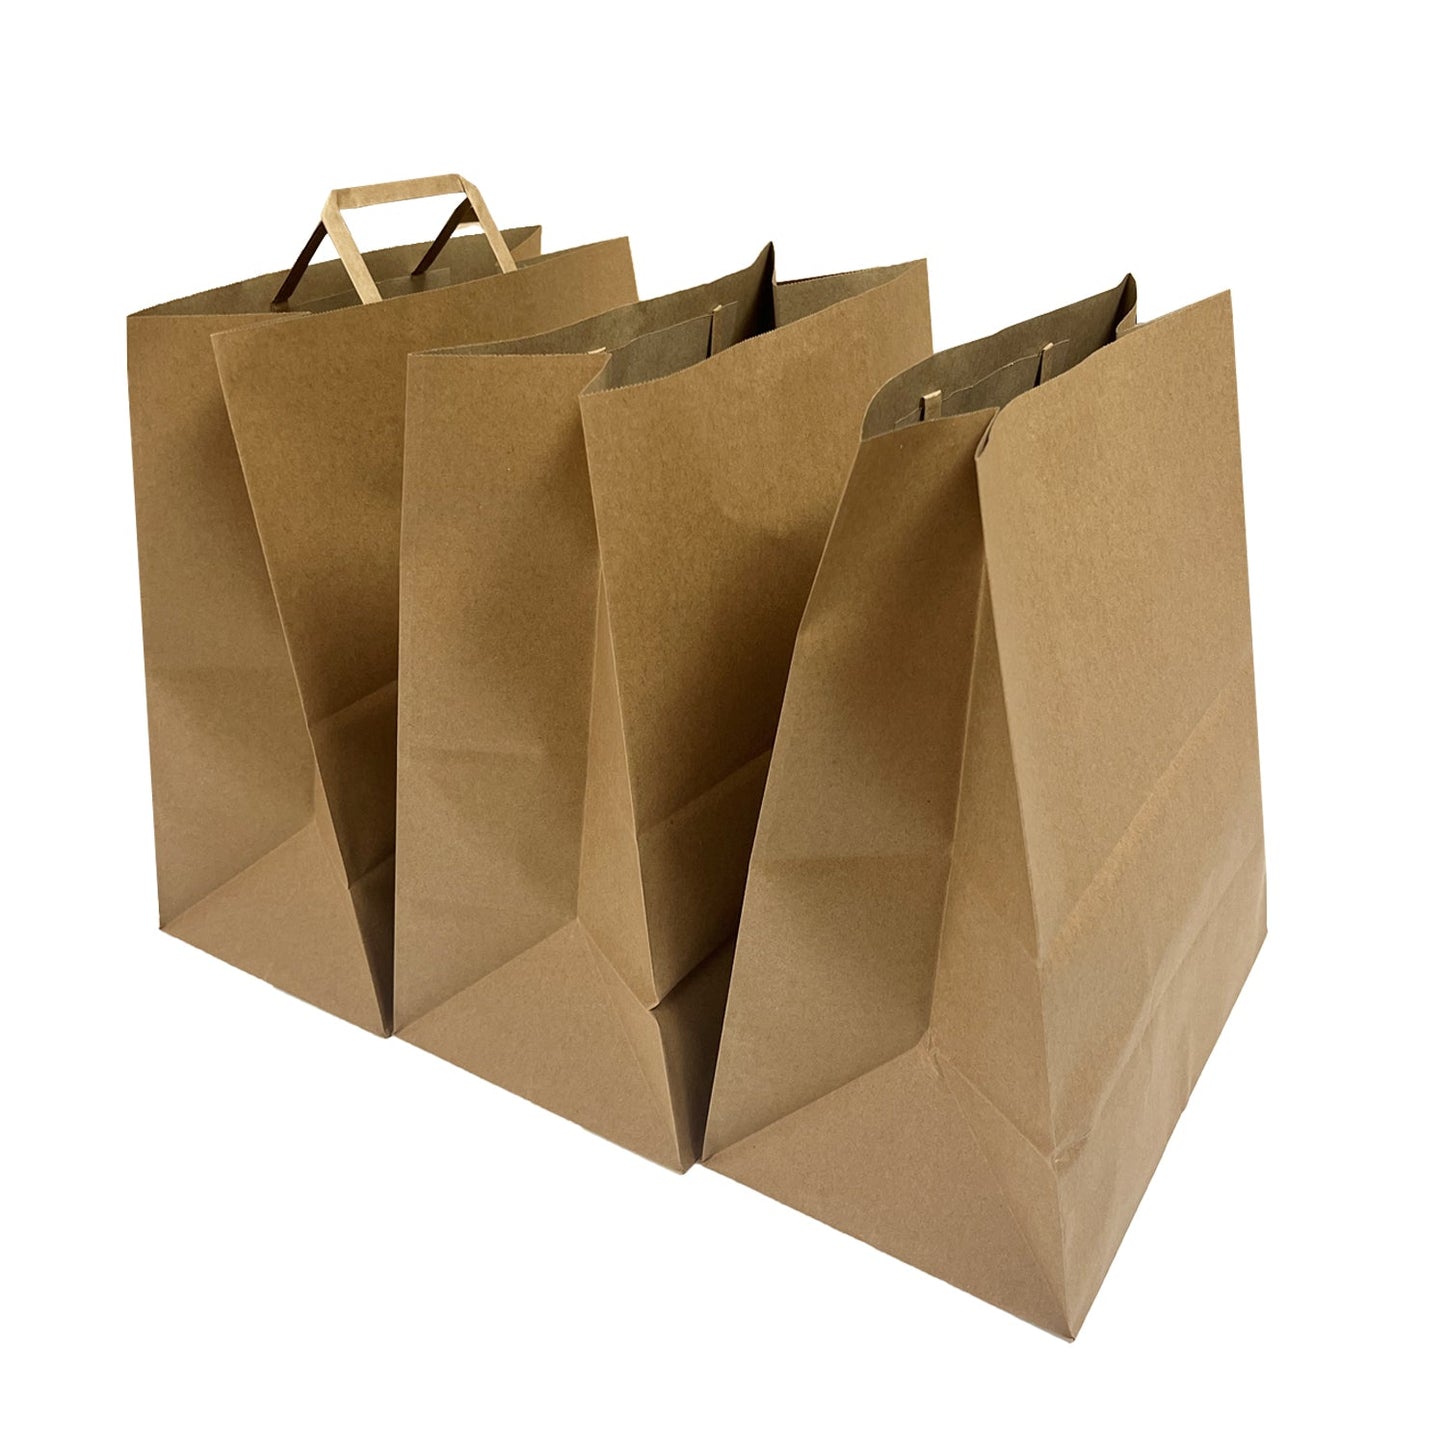 300 Pcs, Winnie,  12x7x14 inches, White Kraft Paper Bags, with Flat handle